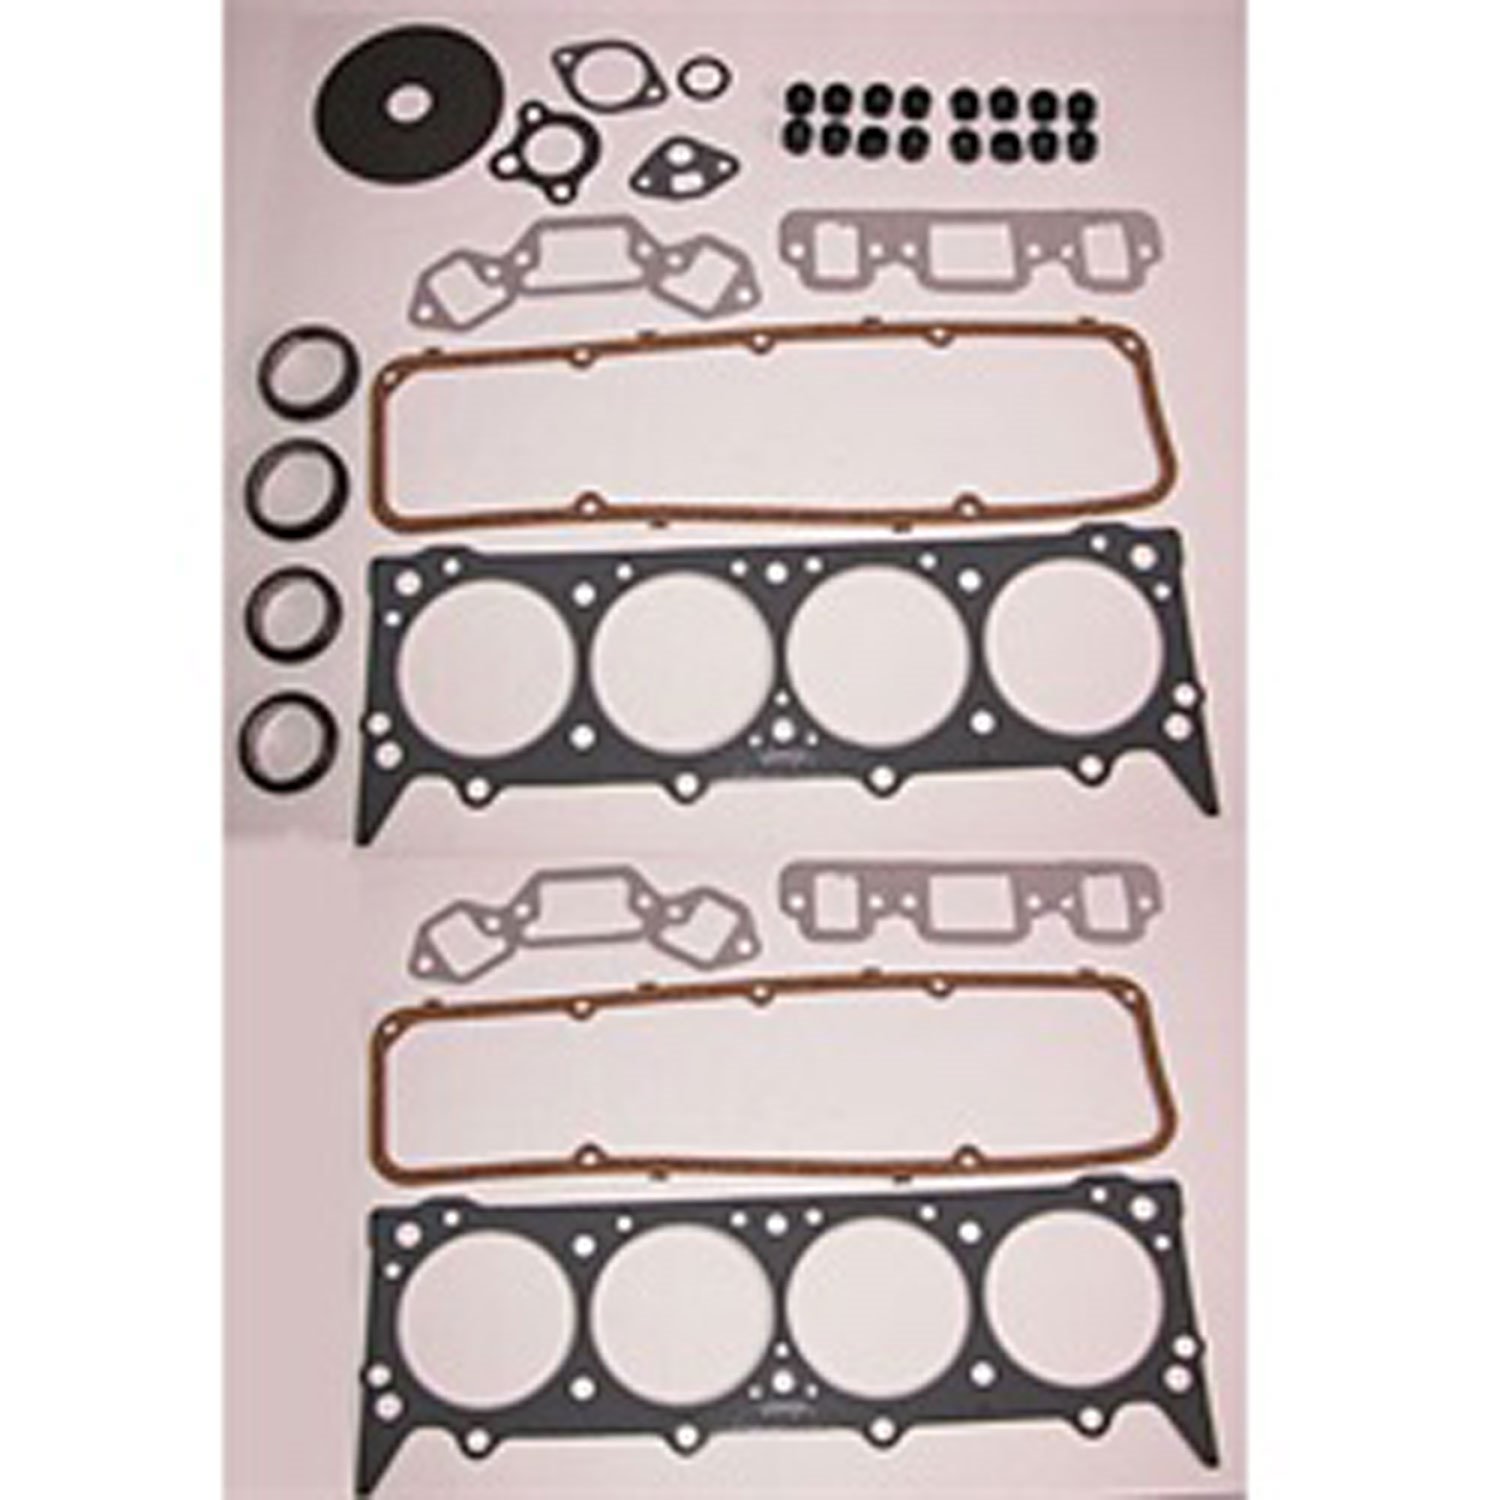 This upper engine gasket set from Omix-ADA fits